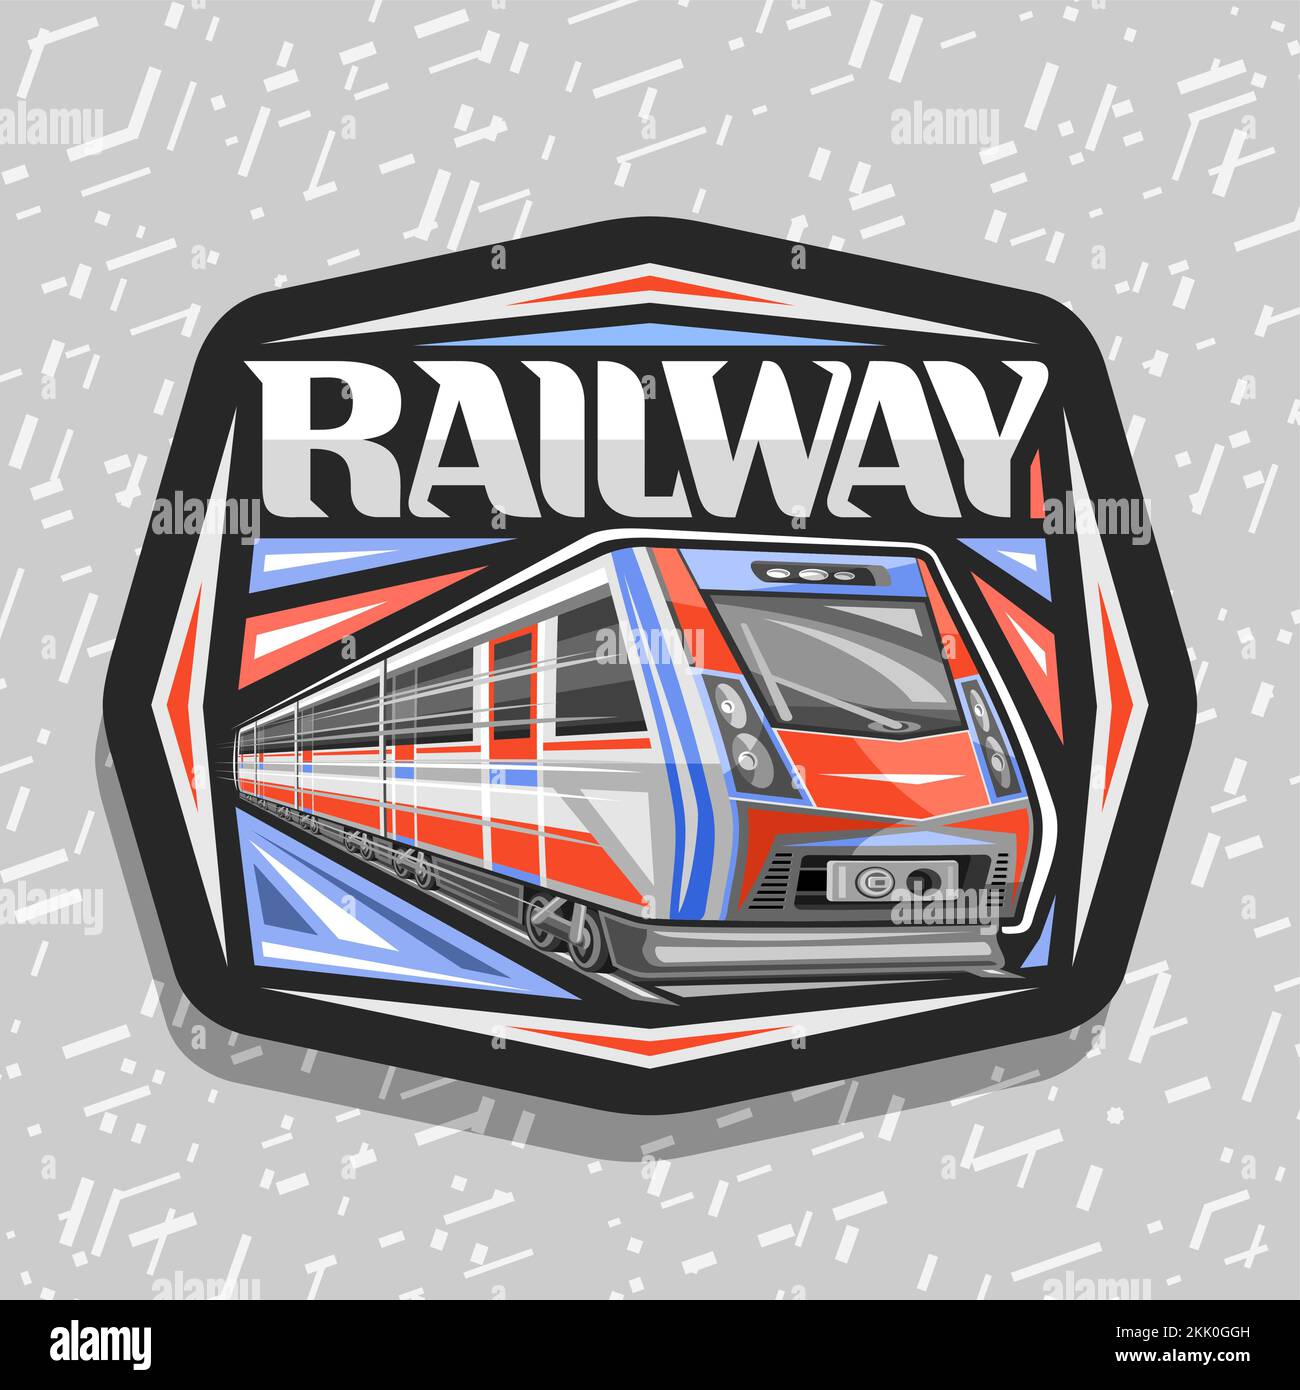 Vector logo for Railway, black decorative sign board with illustration of red urban train rushing by railway, shipping label with unique brush letteri Stock Vector